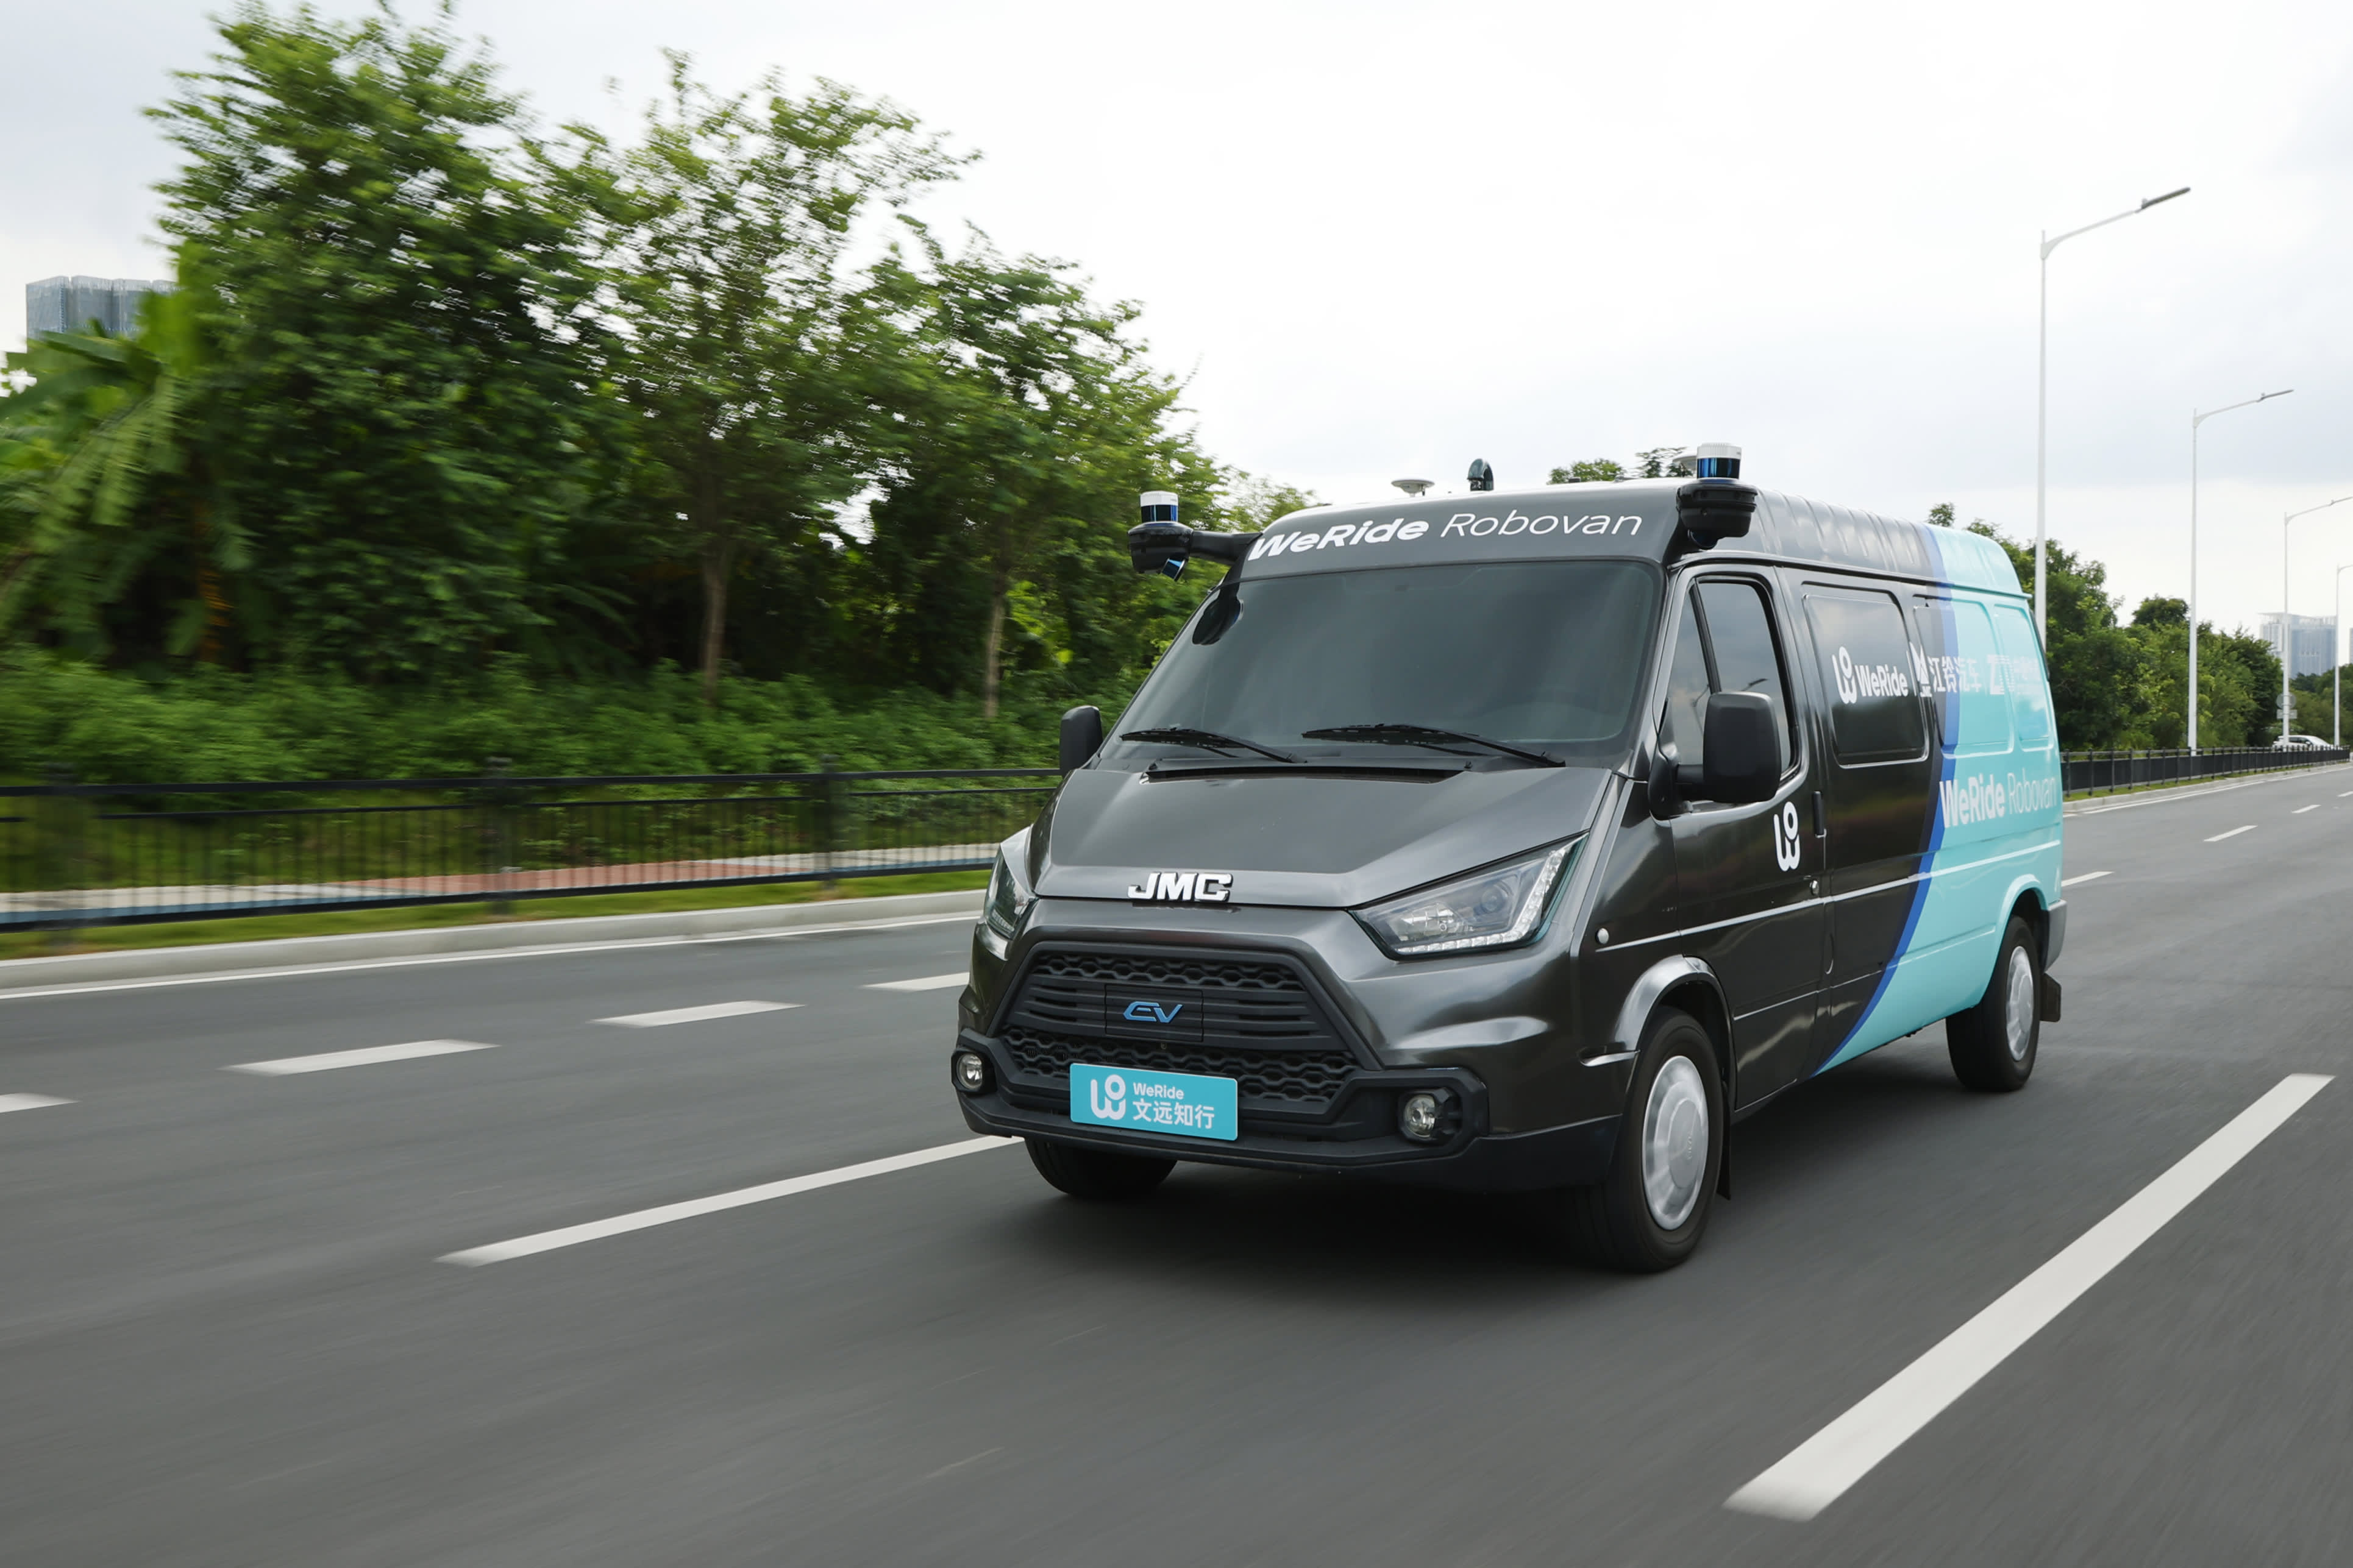 Chinese driverless car firm WeRide launches ‘Robovan’ for deliveries